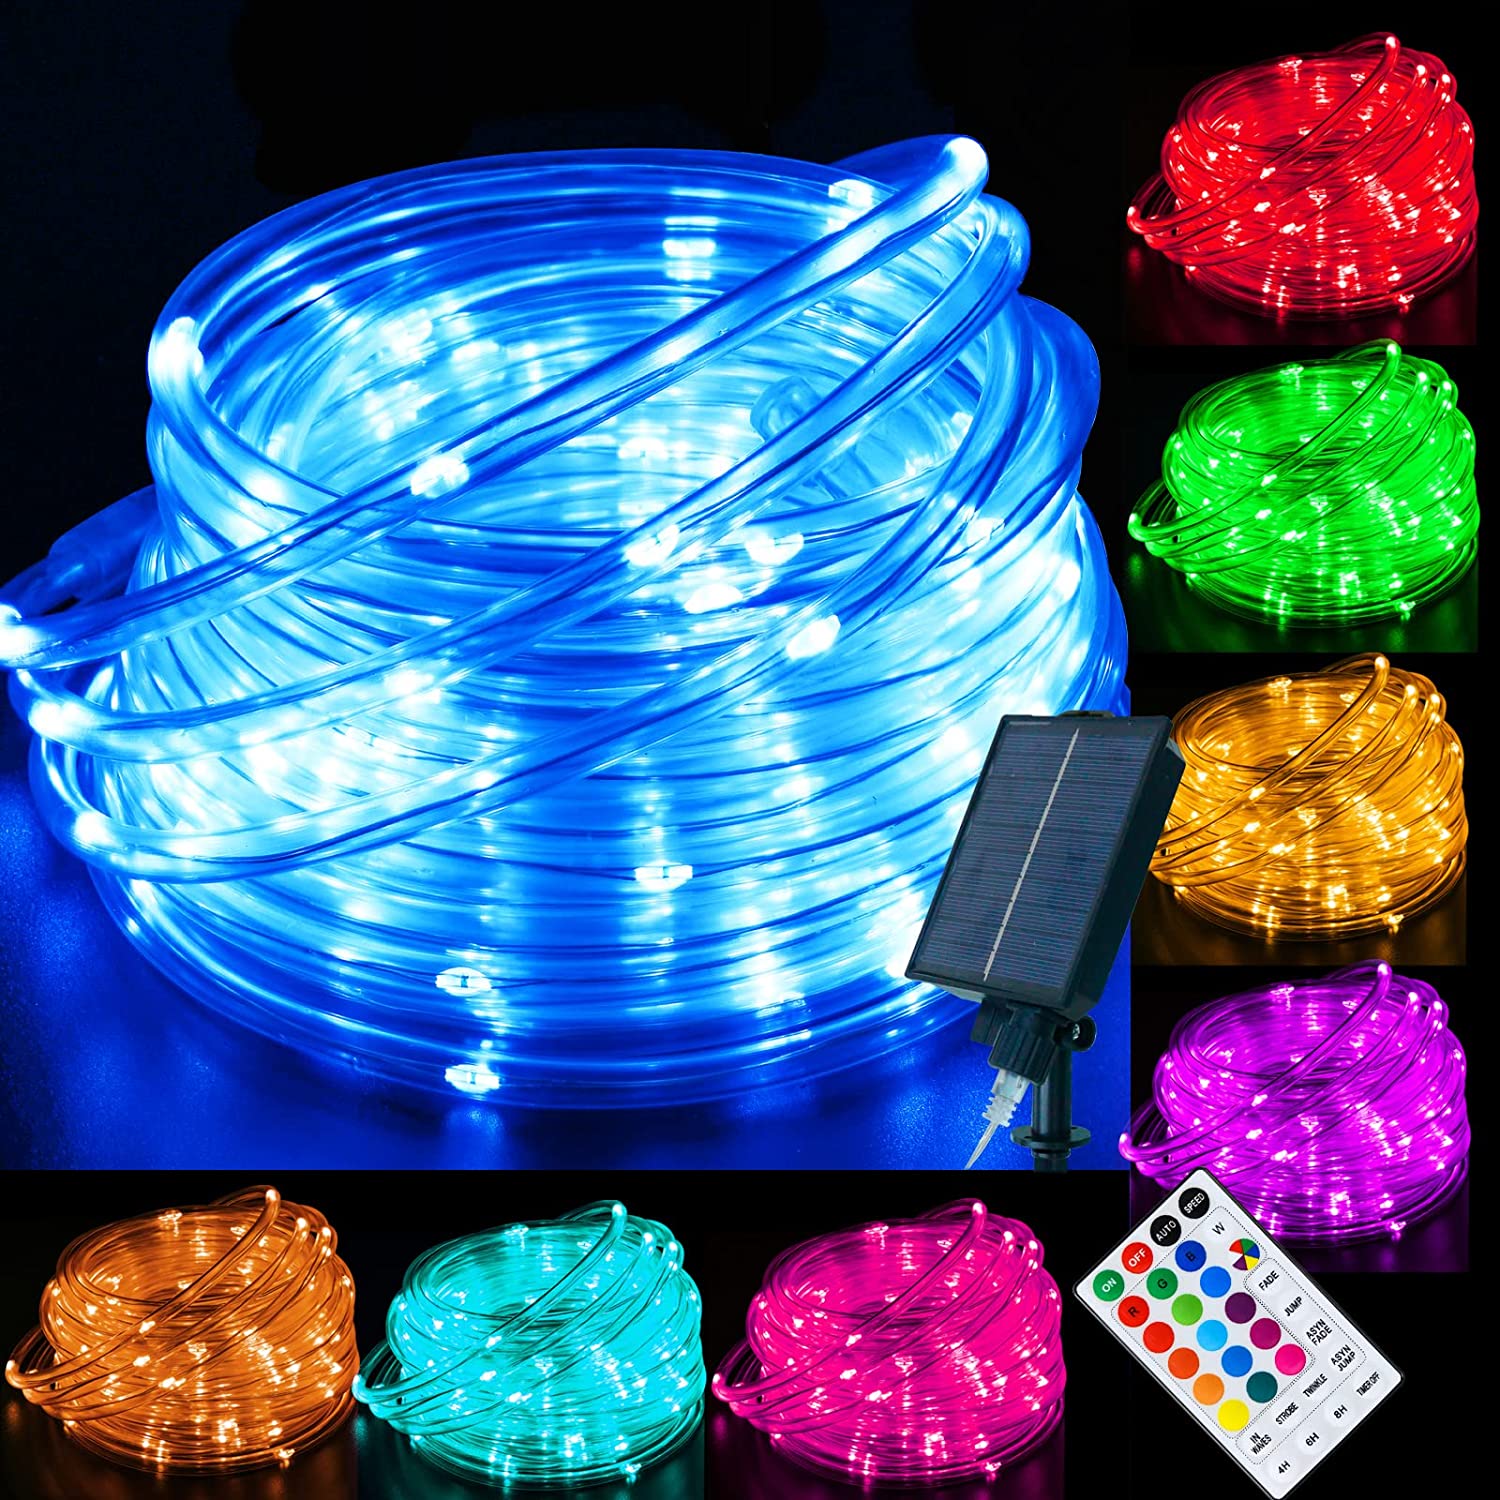 18 Colors 33FT Solar Rope Lights Outdoor Waterproof LED, Color Changing 100 LED Rope Lights Blue Green Pink Fairy String Tube Lights Remote Timer for Garden Fence Tree Party Christmas Holiday Decor